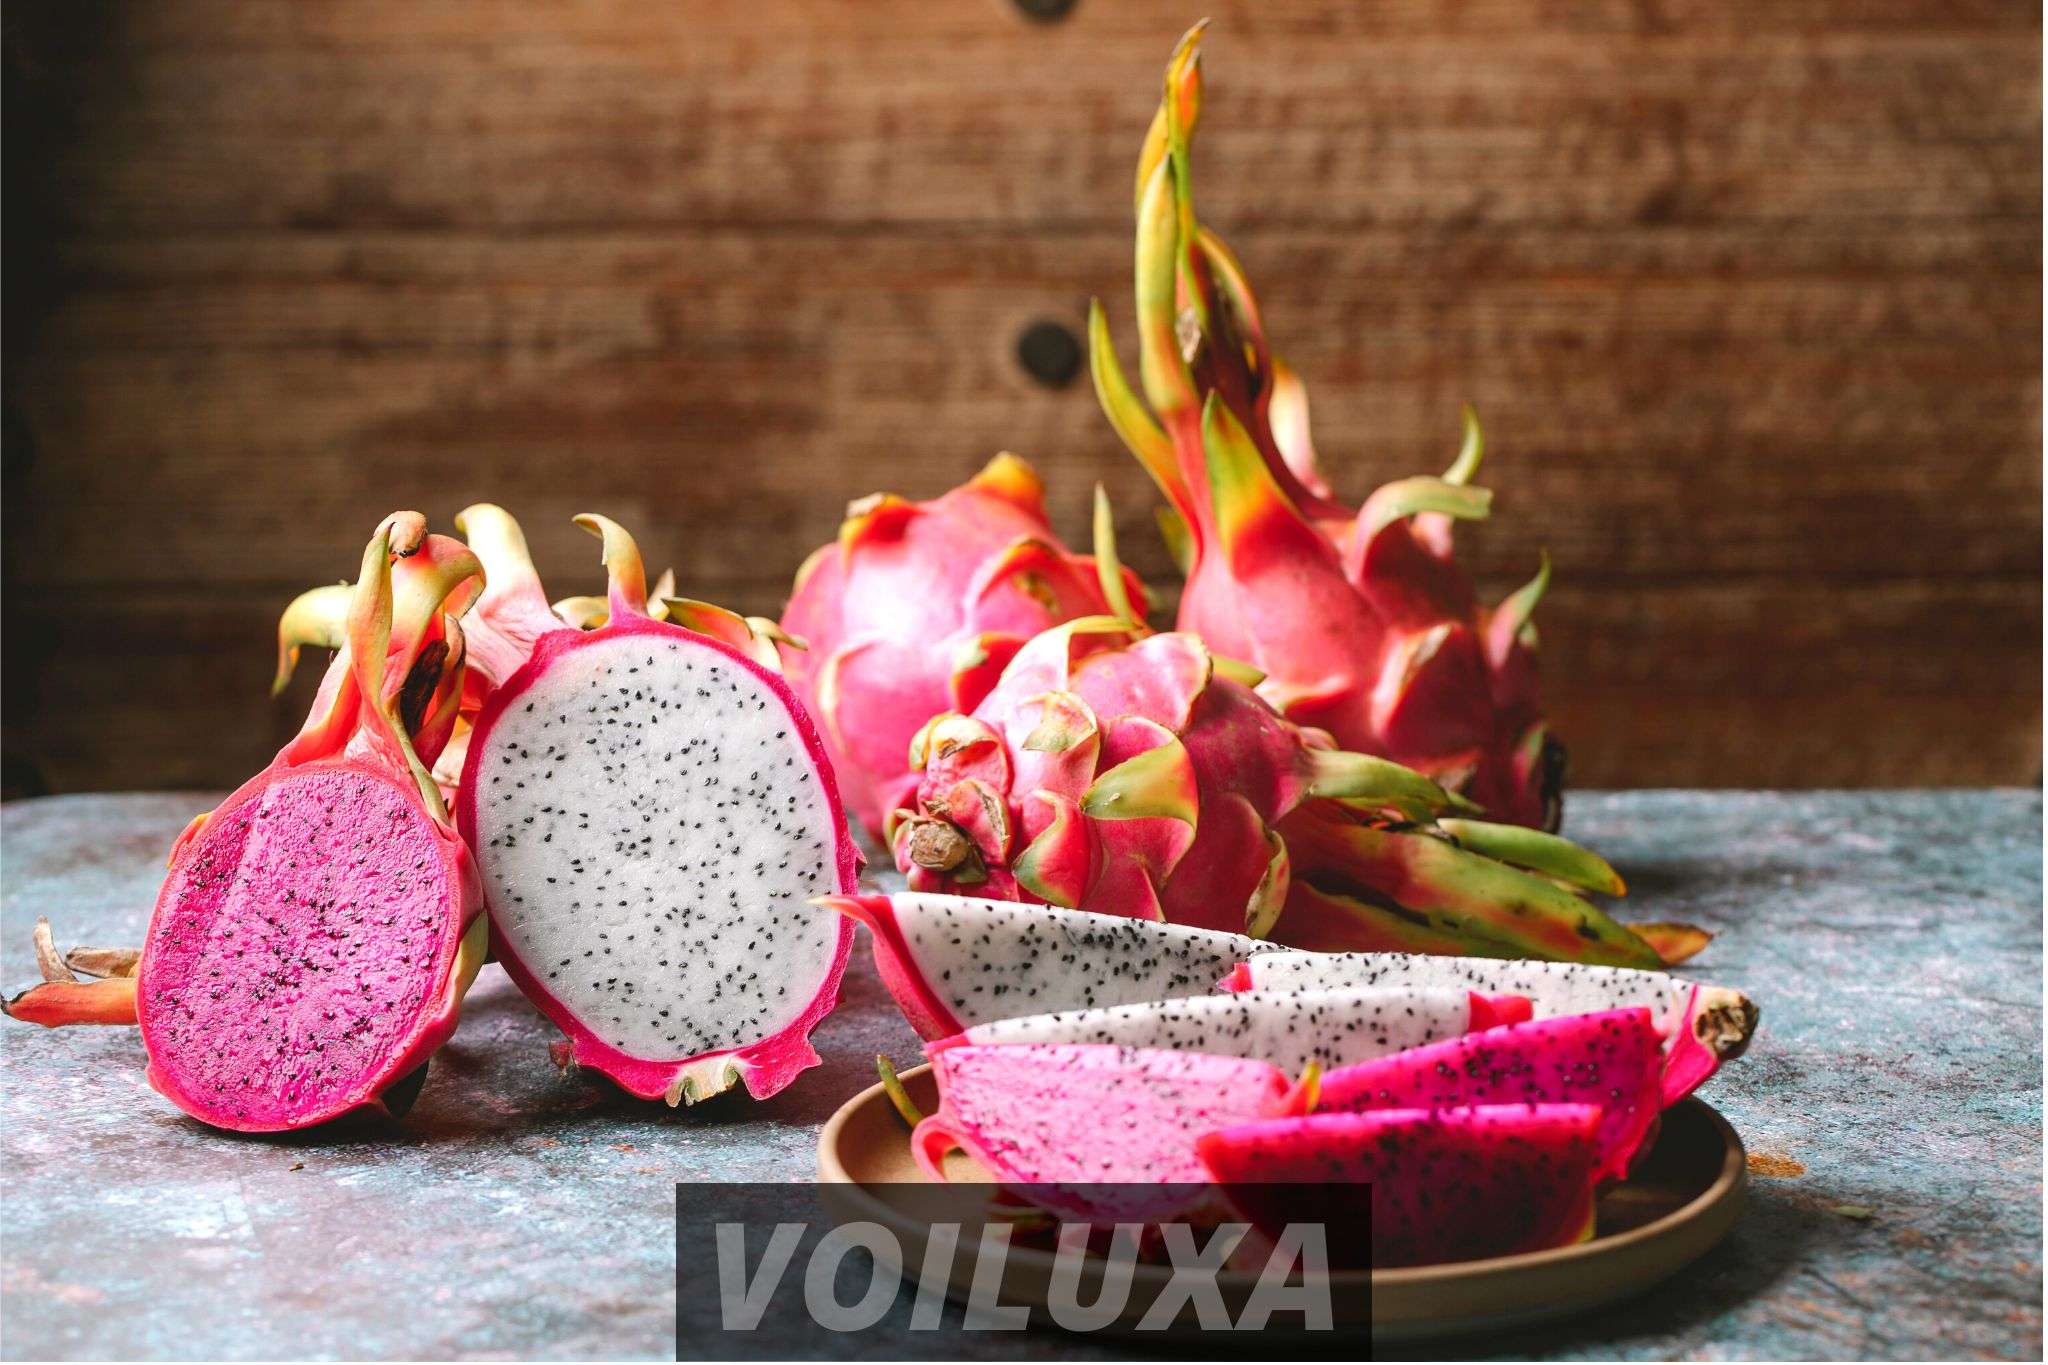 09 Reasons Why Is Dragon Fruit So Expensive?